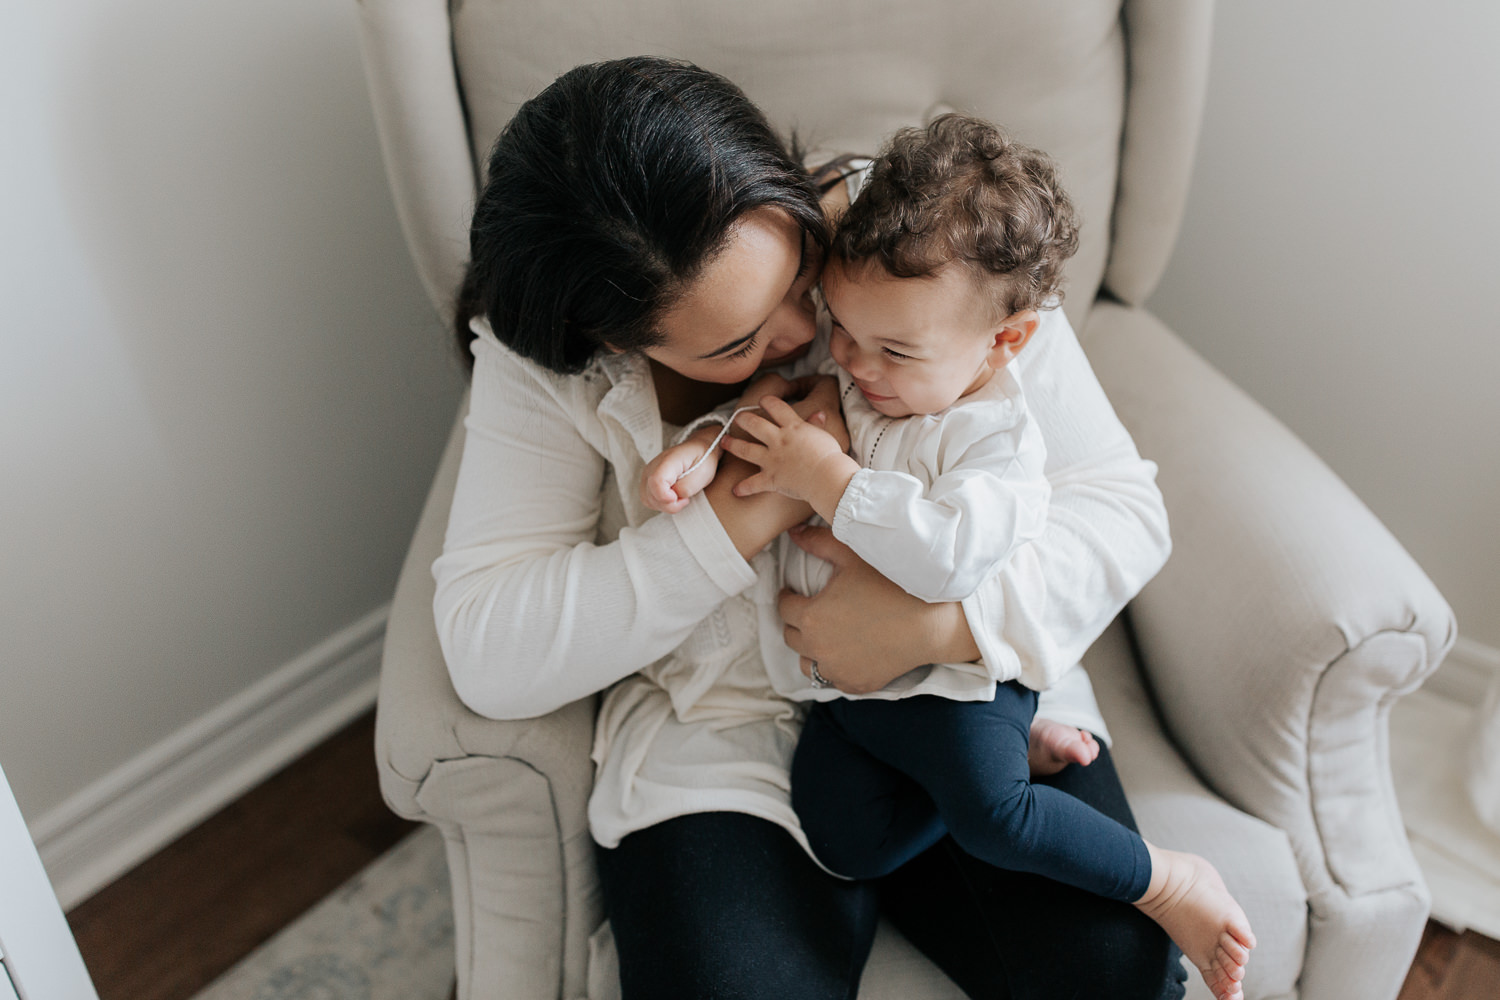 mom with long dark hair in peasant top sitting on nursery glider chair with 1 year old toddler girl with dark curly hair sitting in her lap, mother snuggling daughter - GTA In-Home Photography